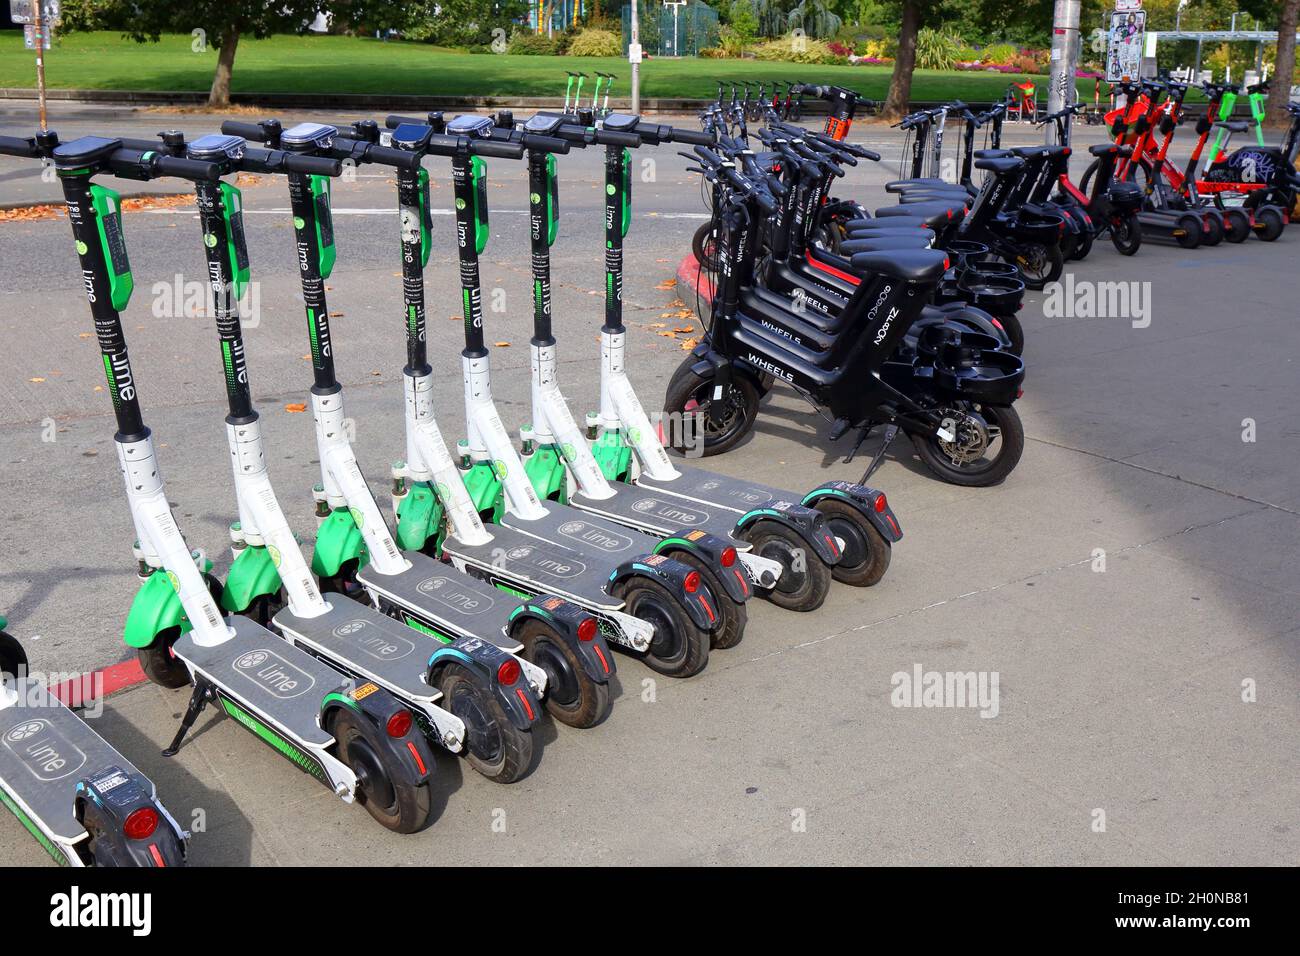 Dozens of rental e-scooters and e-bikes lined up on a Seattle sidewalk offering Lime e-scooters, Wheels rental e-bikes, and Spin e-scooters. Stock Photo